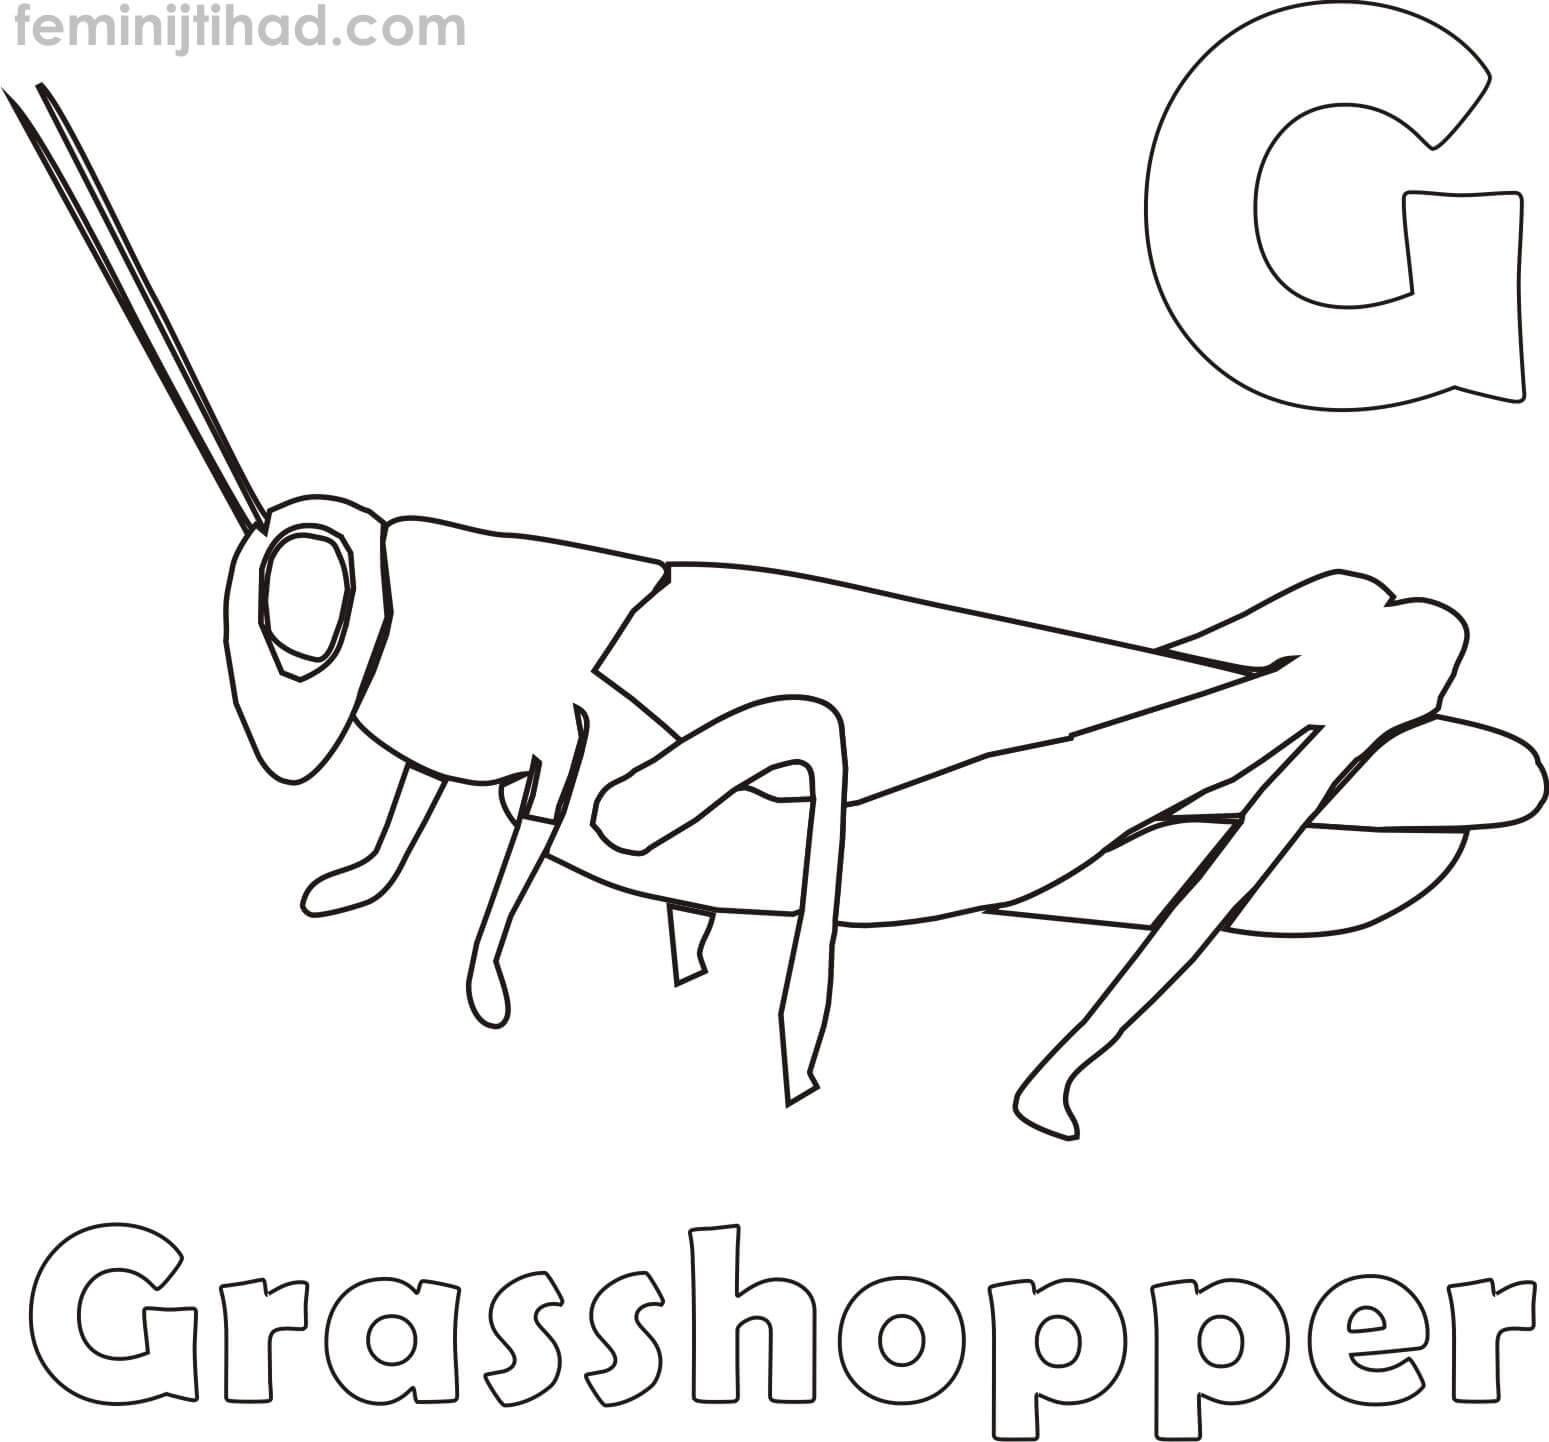 coloring page of a grasshopper